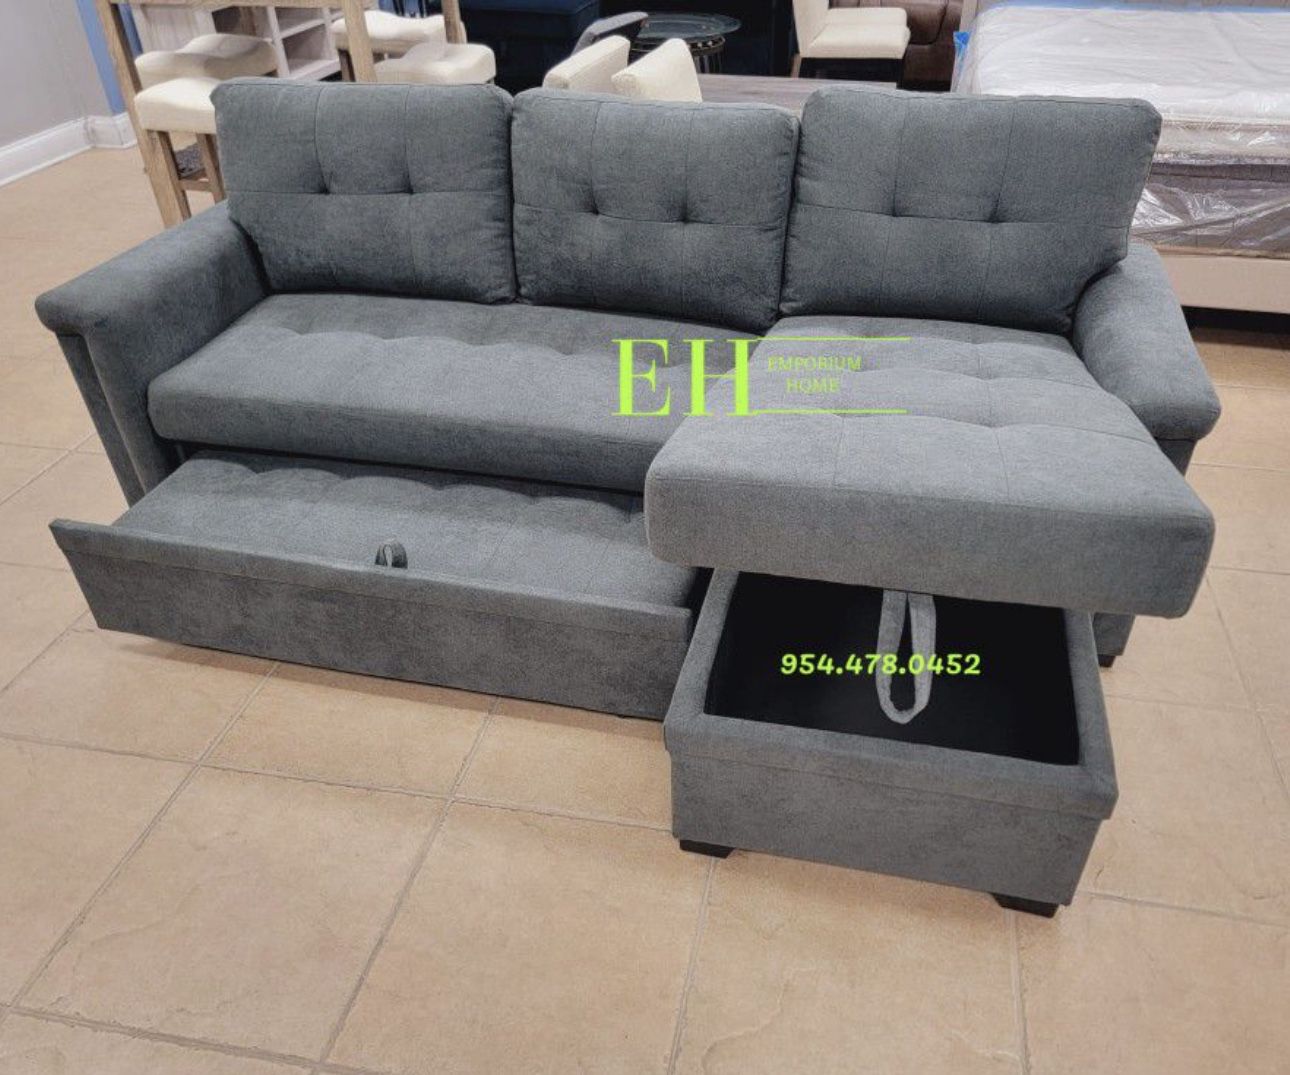 Linen Sofa Sectional Sleeper With Storage 